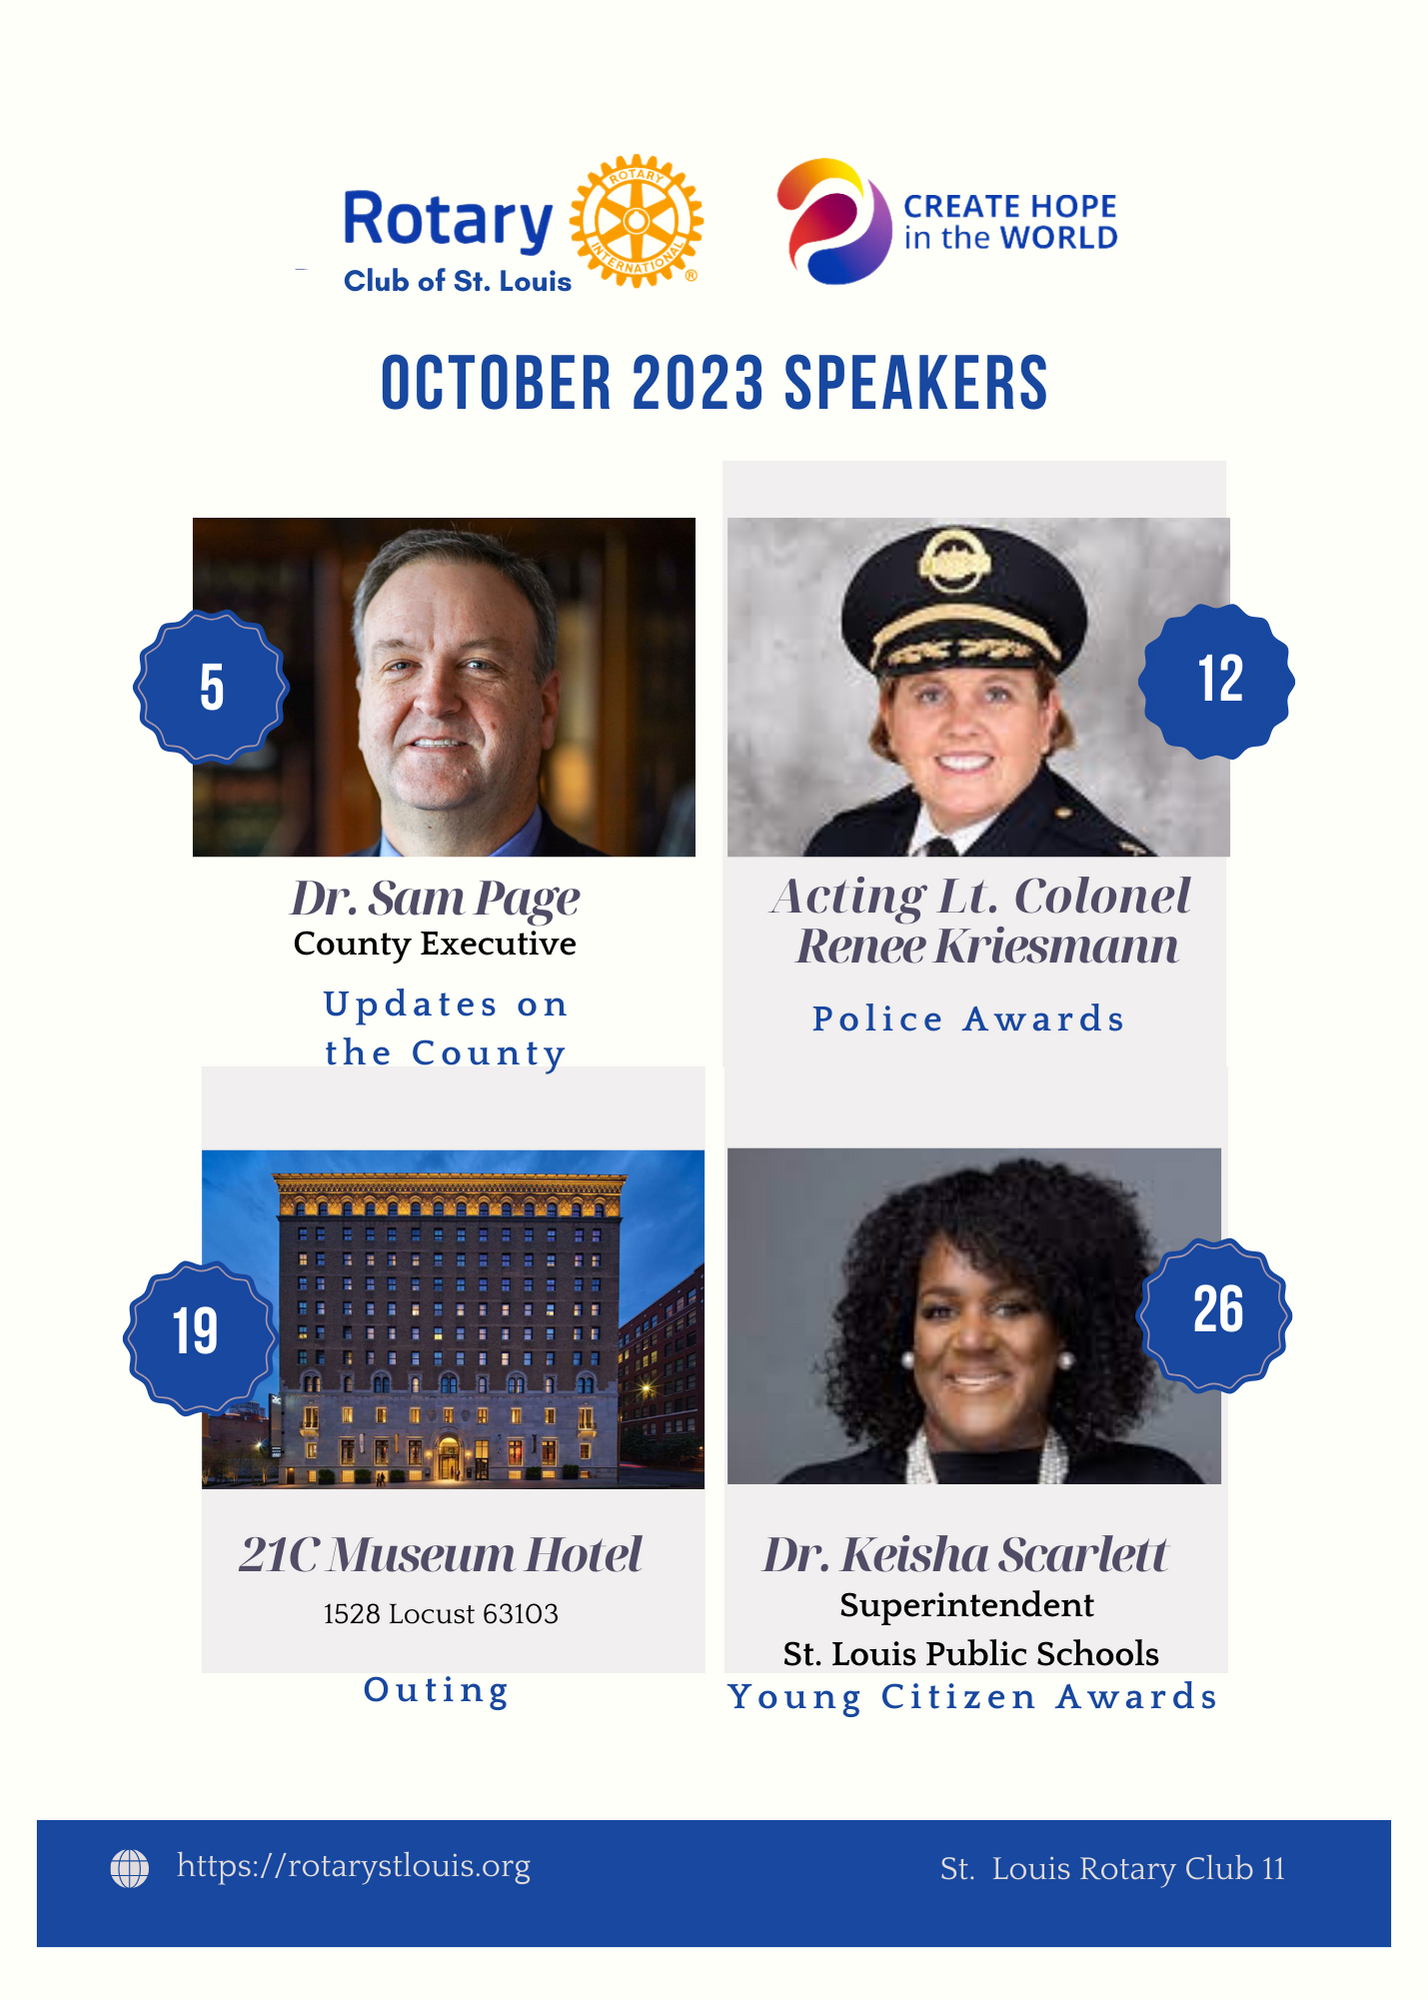 October 2023 speakers at St. Louis Rotary Club 11